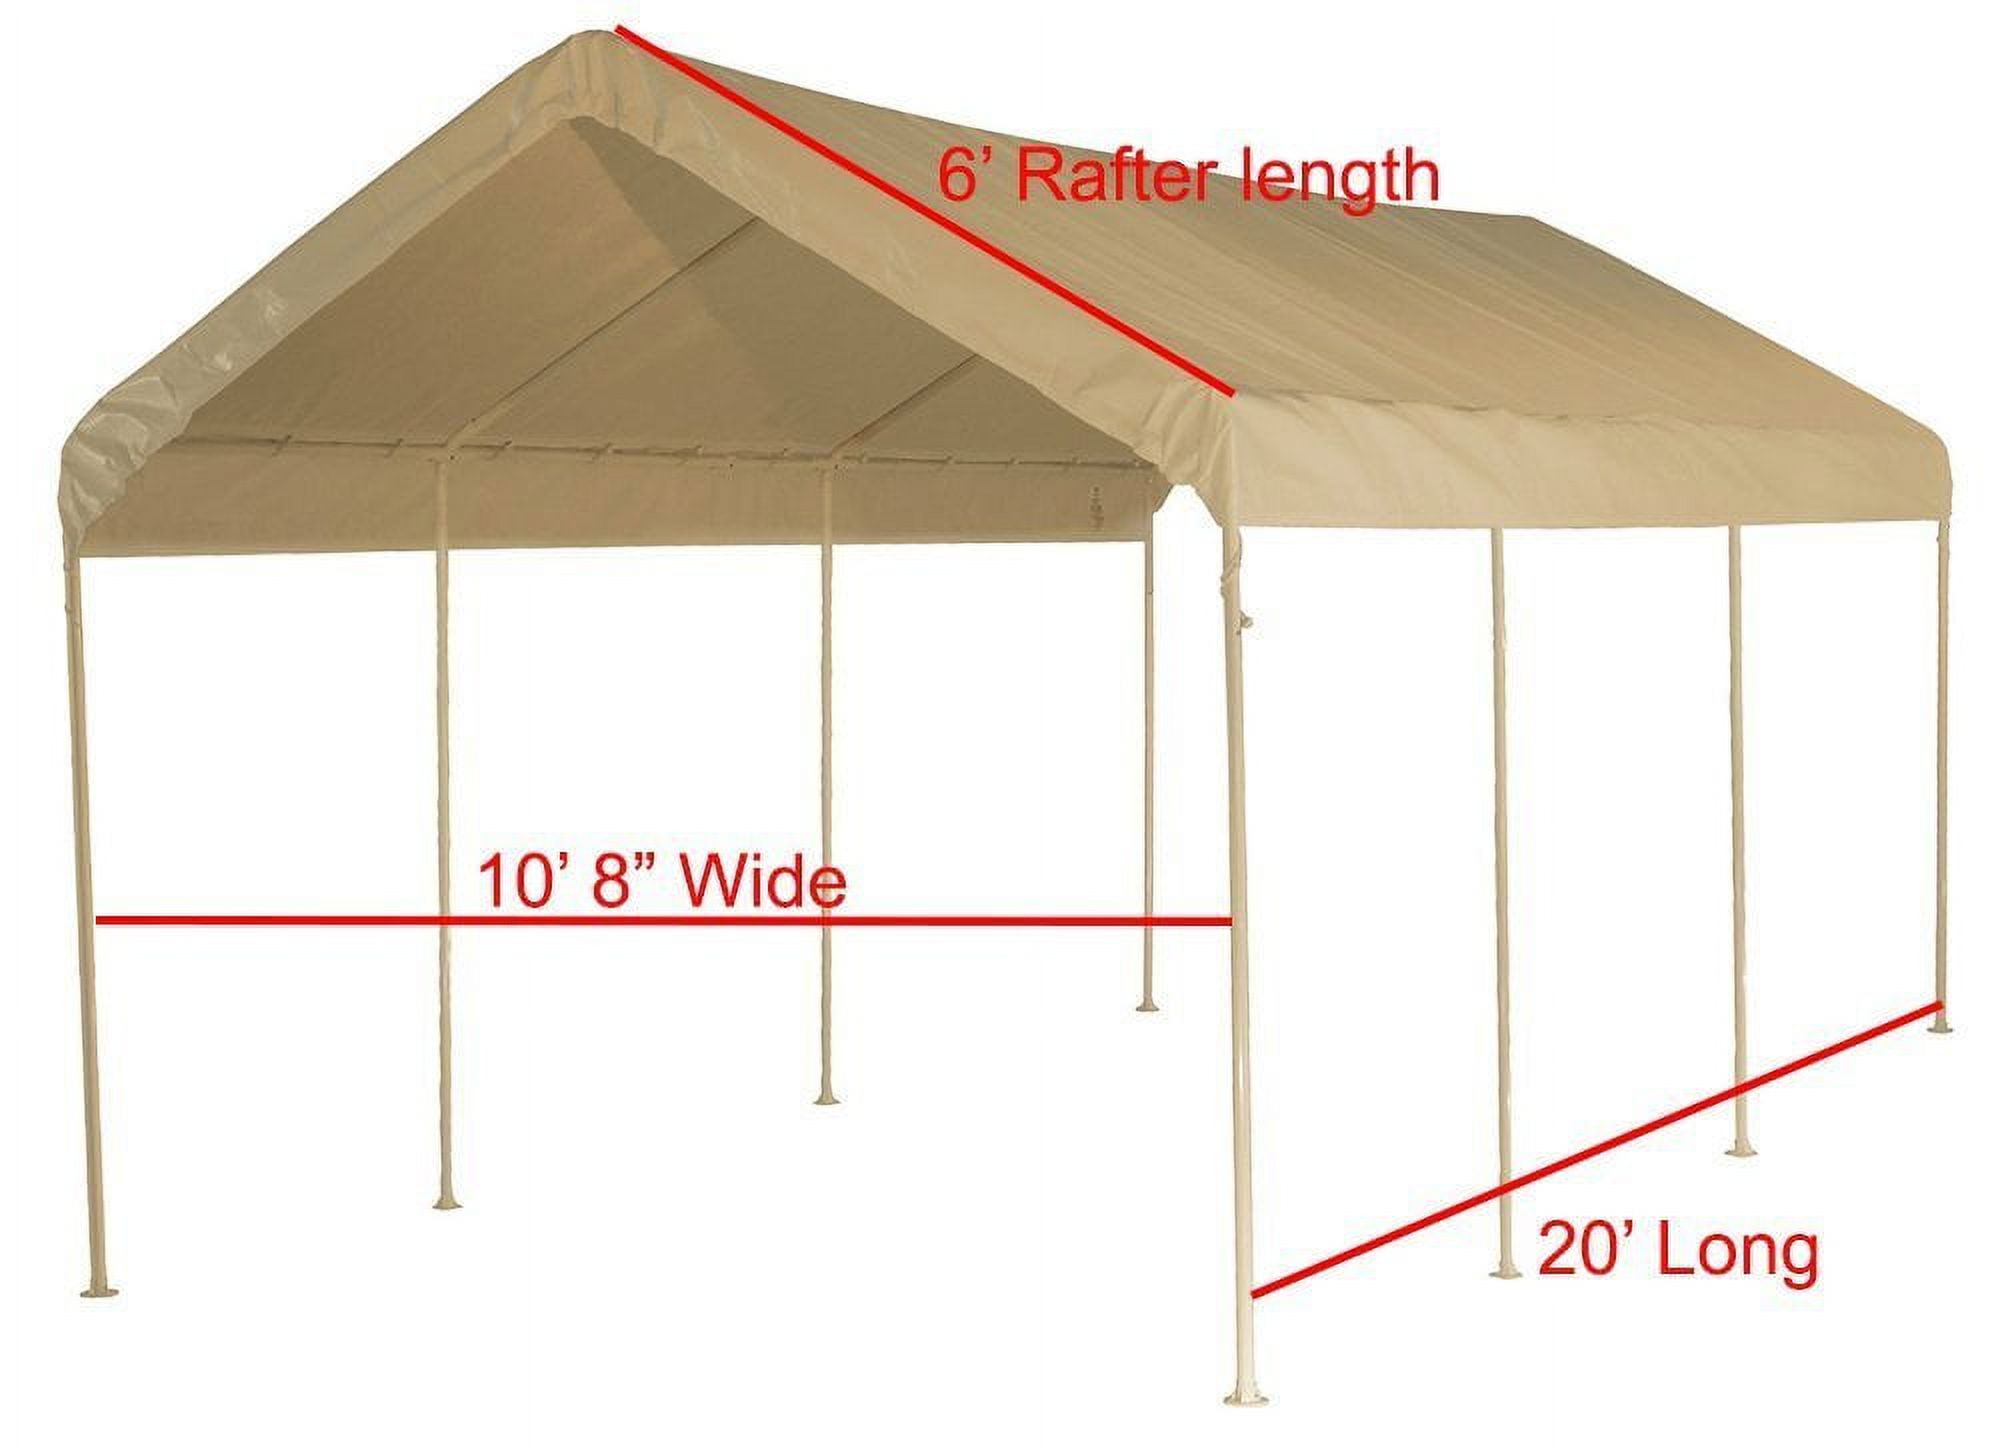 COSTCO 10 x 20 foot HEAVY DUTY CANOPY Replacement Tan Roof Top Cover Only  Tent